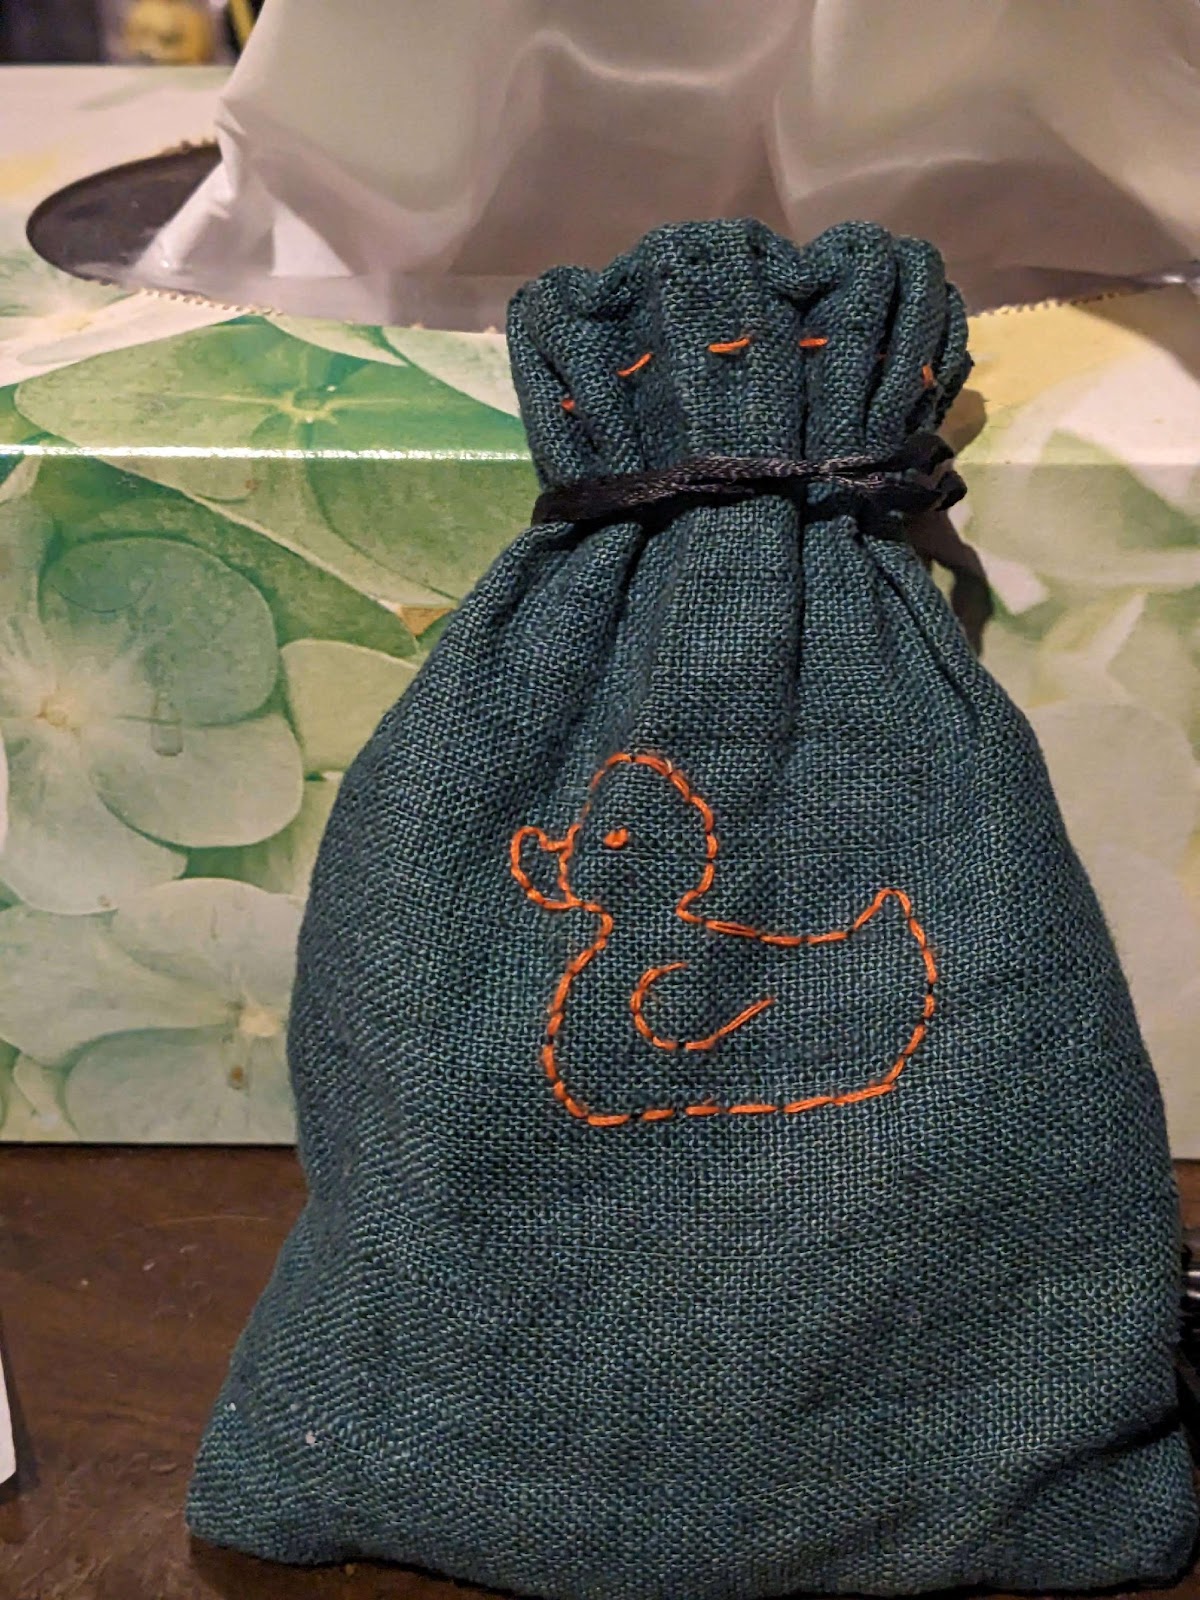 A bag with a duck on it

Description automatically generated